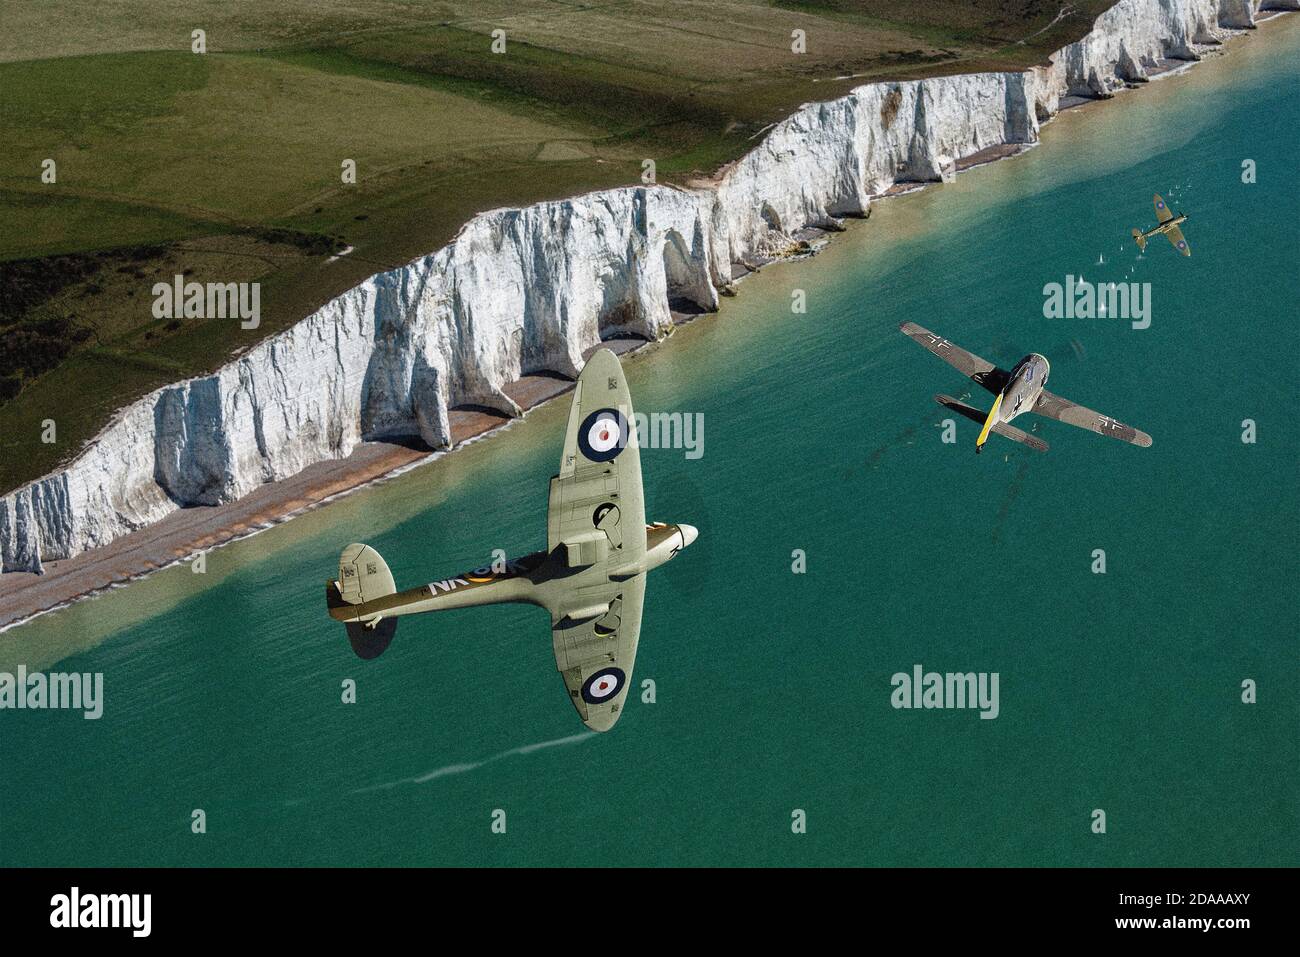 An RAF Supermarine Spitfire banks to attack a Luftwaffe Focke-Wulf FW190 fighter over the Cliffs of Dover. A mixture of plastic models and Photoshop. Stock Photo